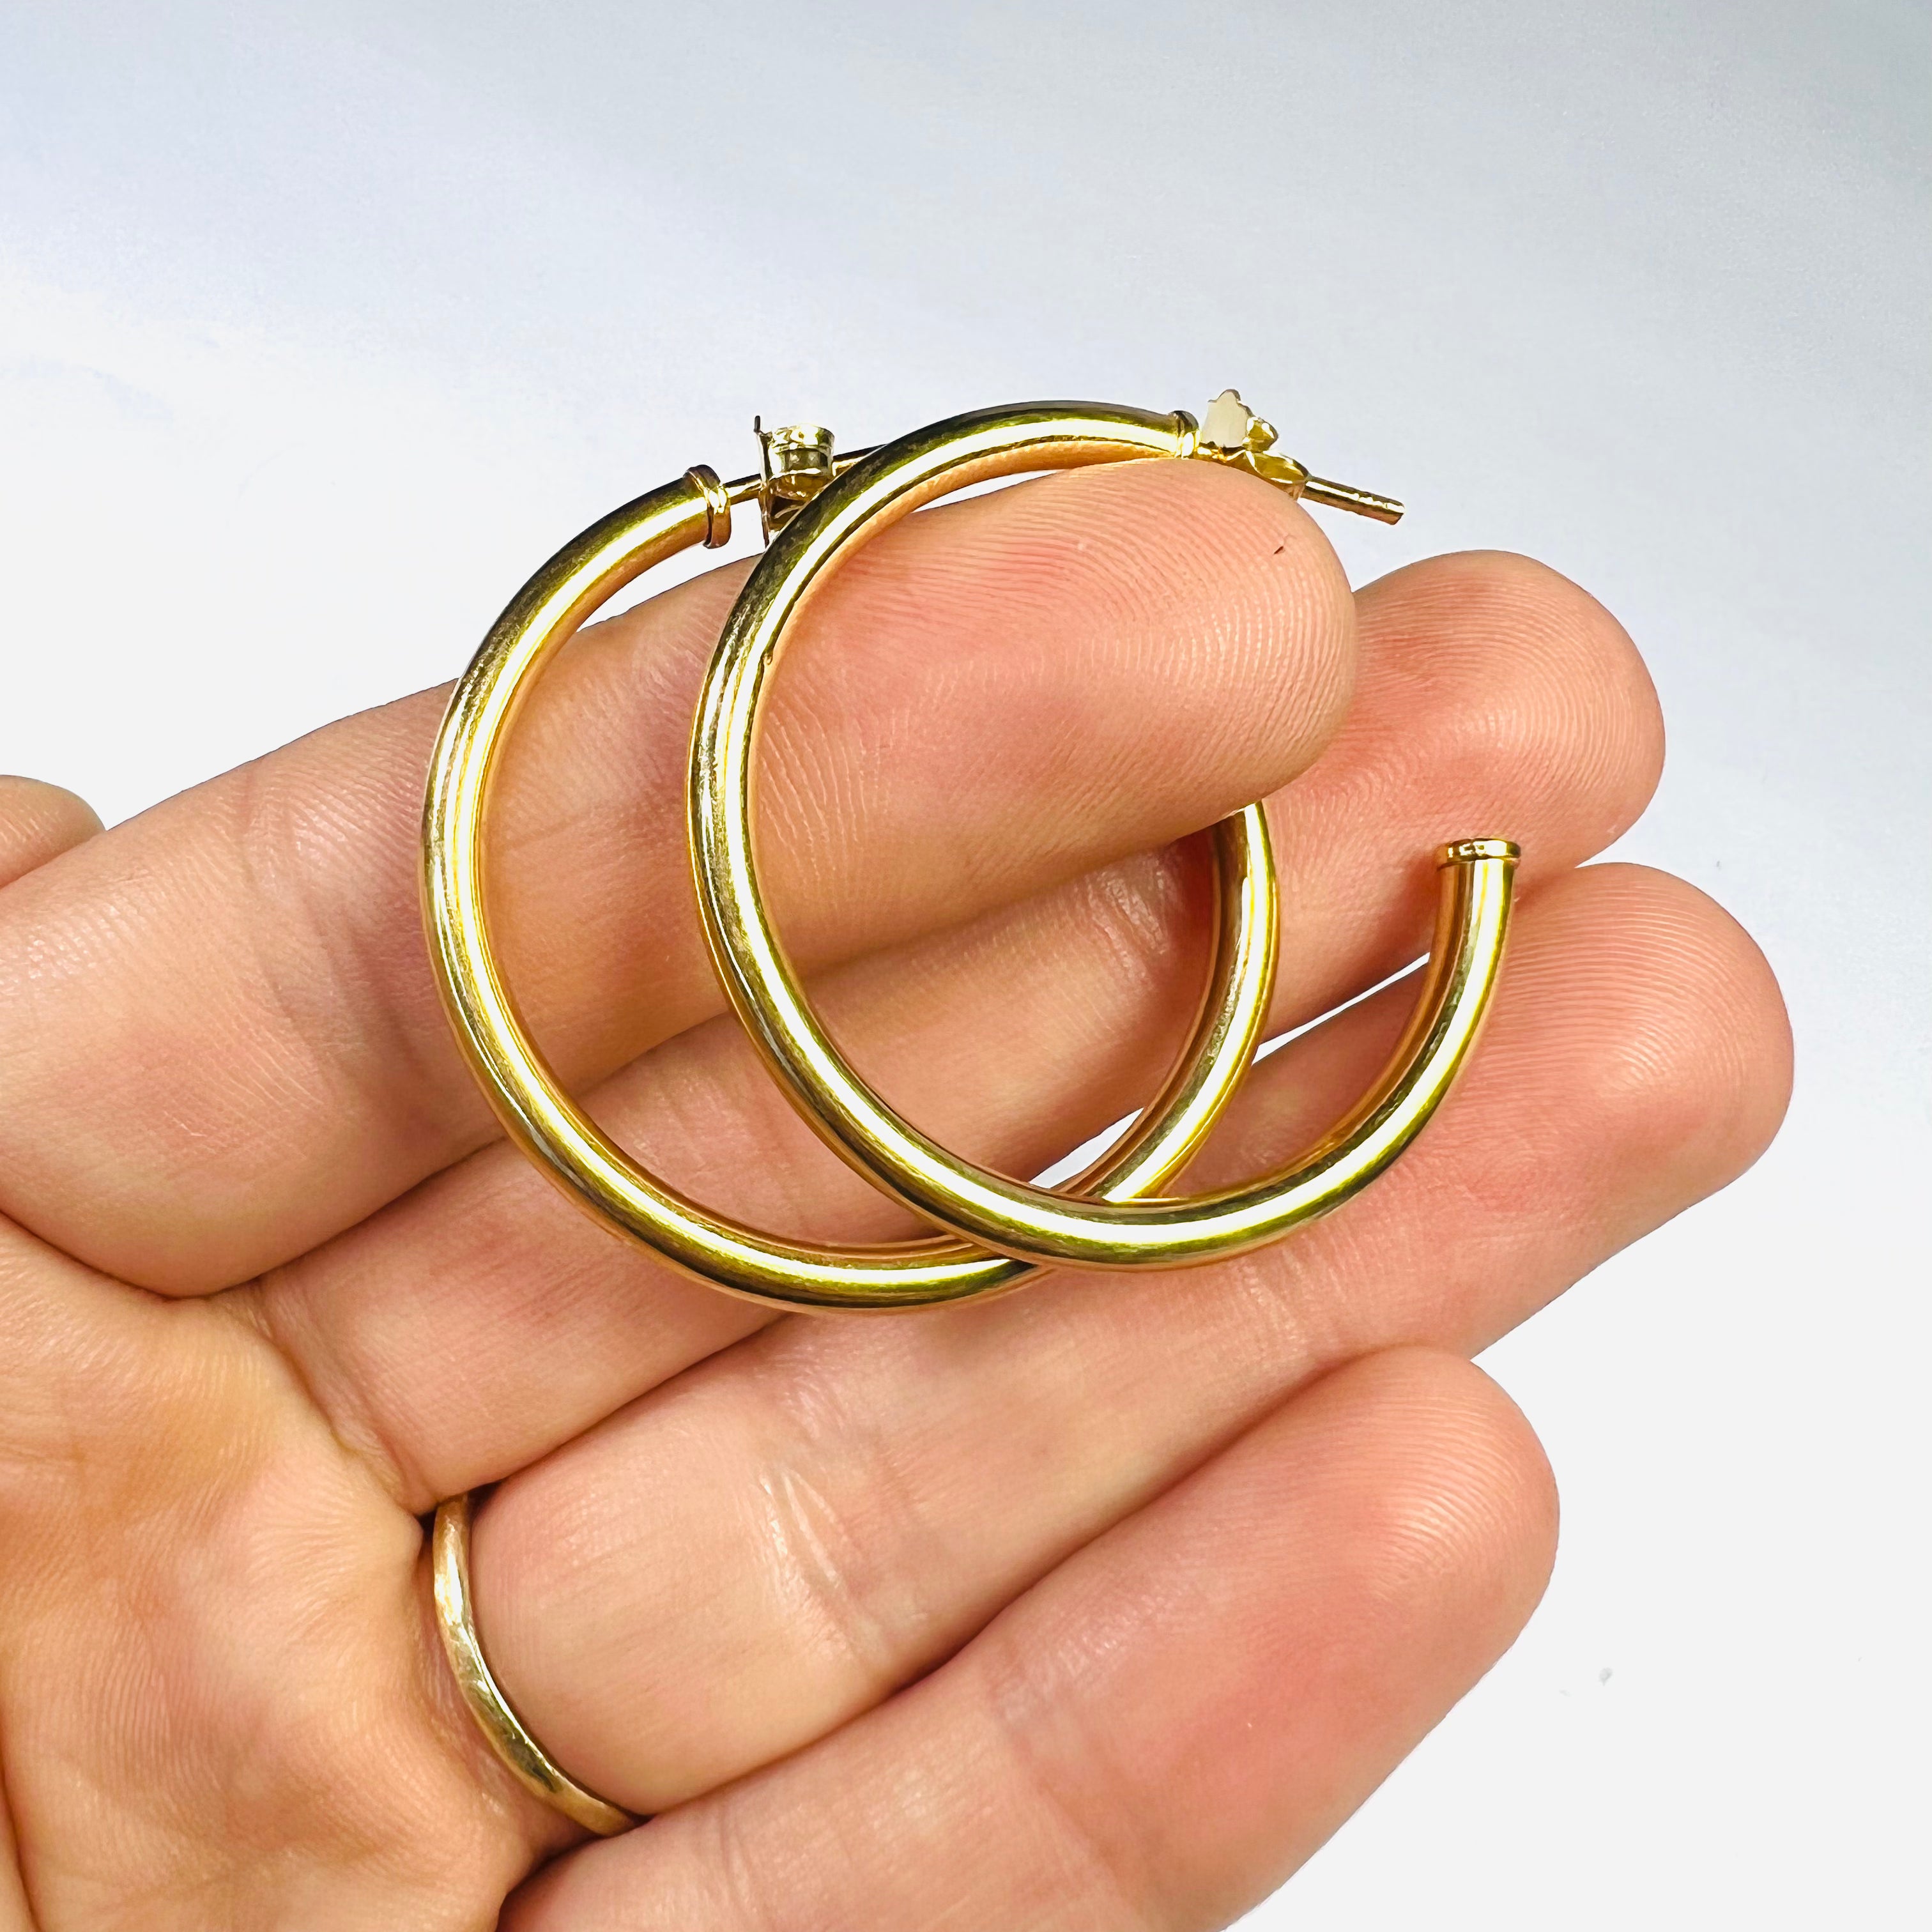 Solid 14k Yellow Gold Smooth Half Earring Hoop 1.4" 2.86g